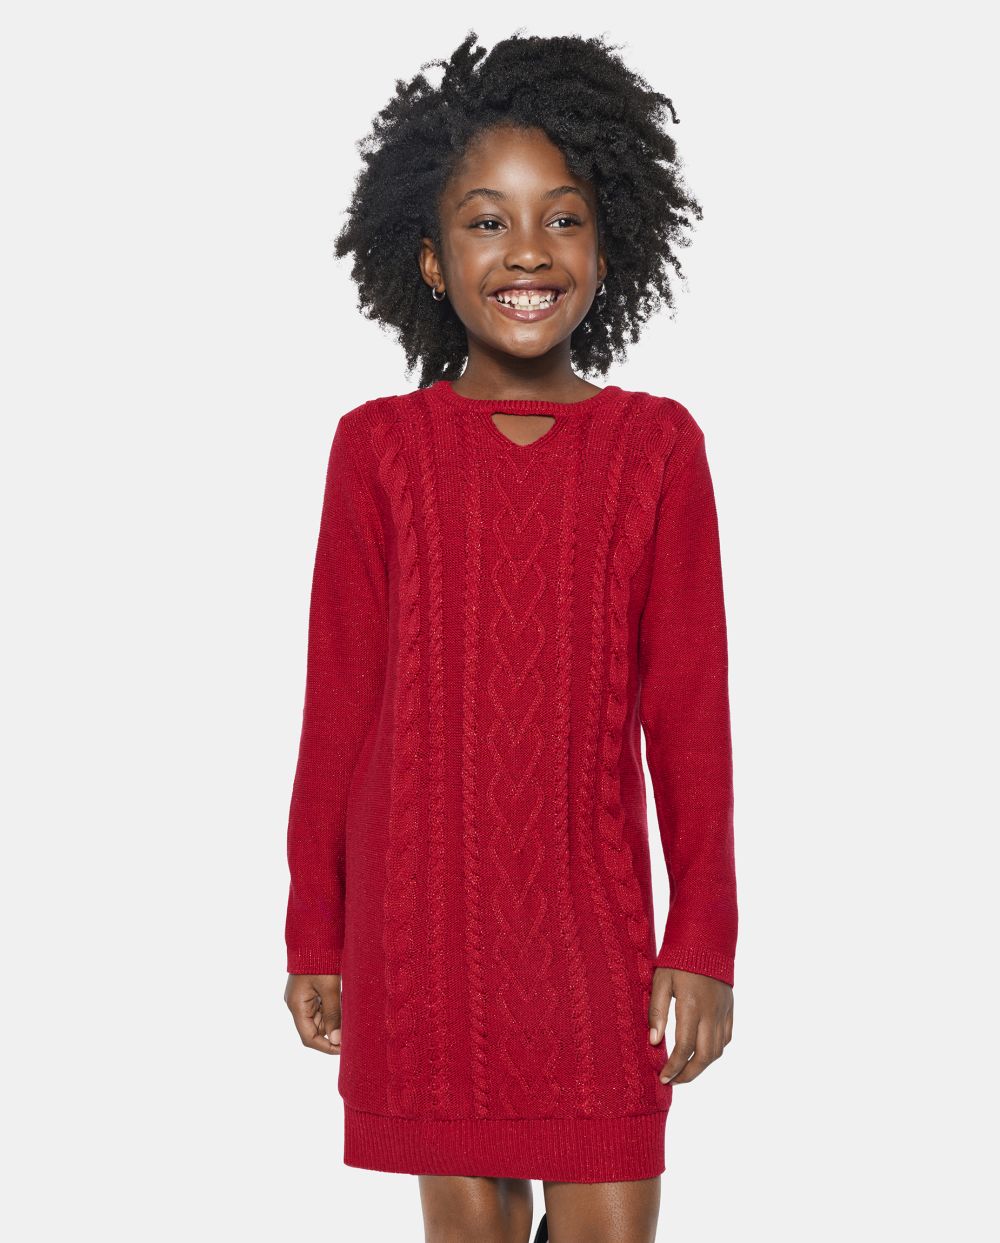 Girls Sweater Crew Neck Above the Knee Cutout Long Sleeves Dress